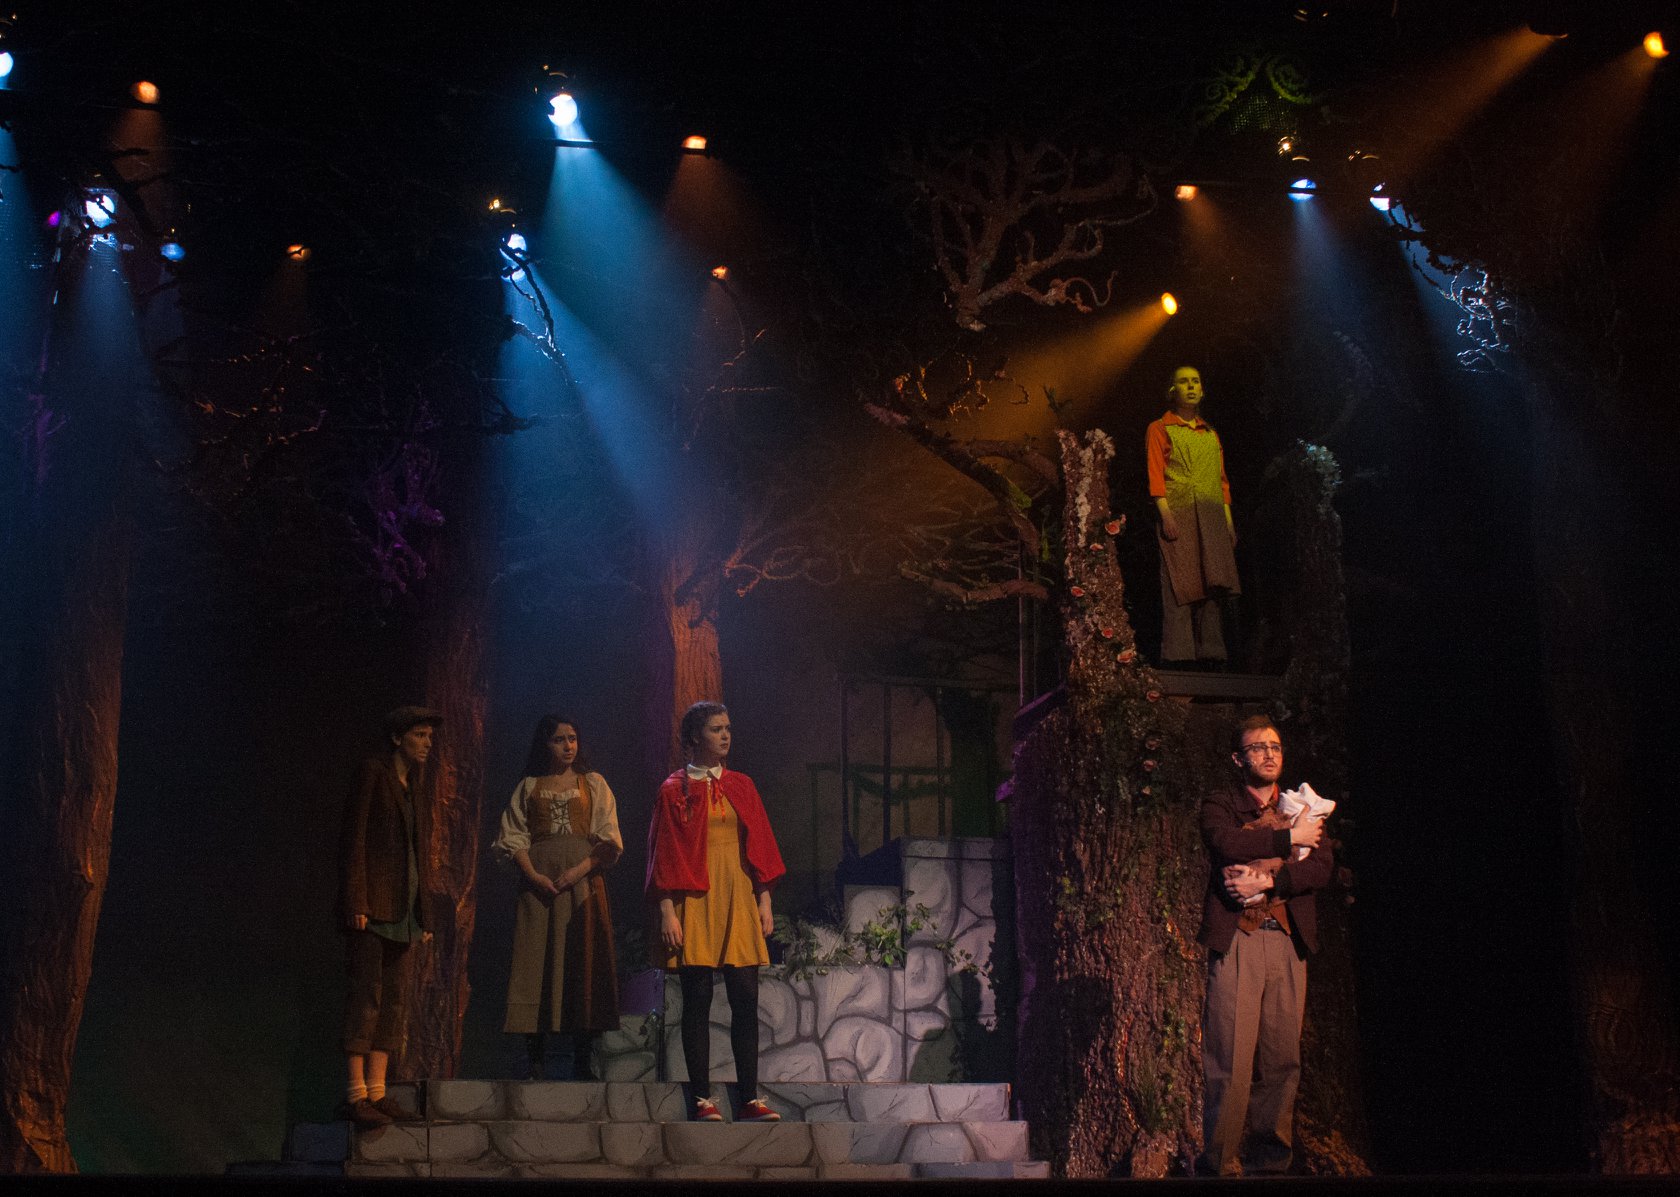    Into the Woods  by Lapine &amp; Sondheim Fordham University   Musical direction by Alex Parrish Scenery design by Annika Fagerstorm Costumes design by Megan O’Keeffe &amp; Griffin LaMarche Lights design by Helen Bucks &amp; Gillian Roberts Sound d